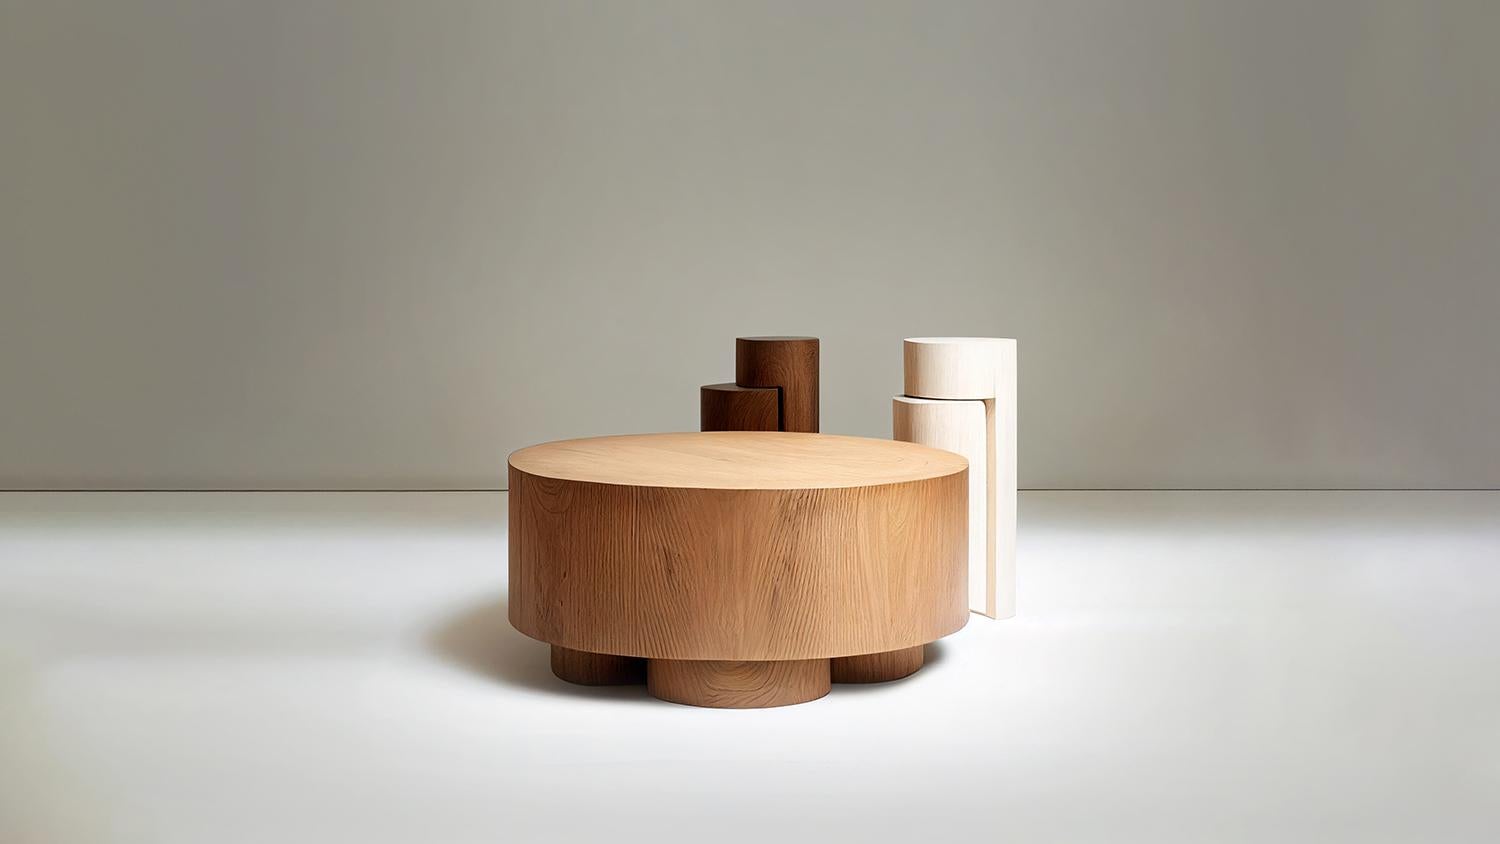 Mexican Brutalist Round Coffee Table in Red Oak Wood Veneer, Podio by NONO For Sale